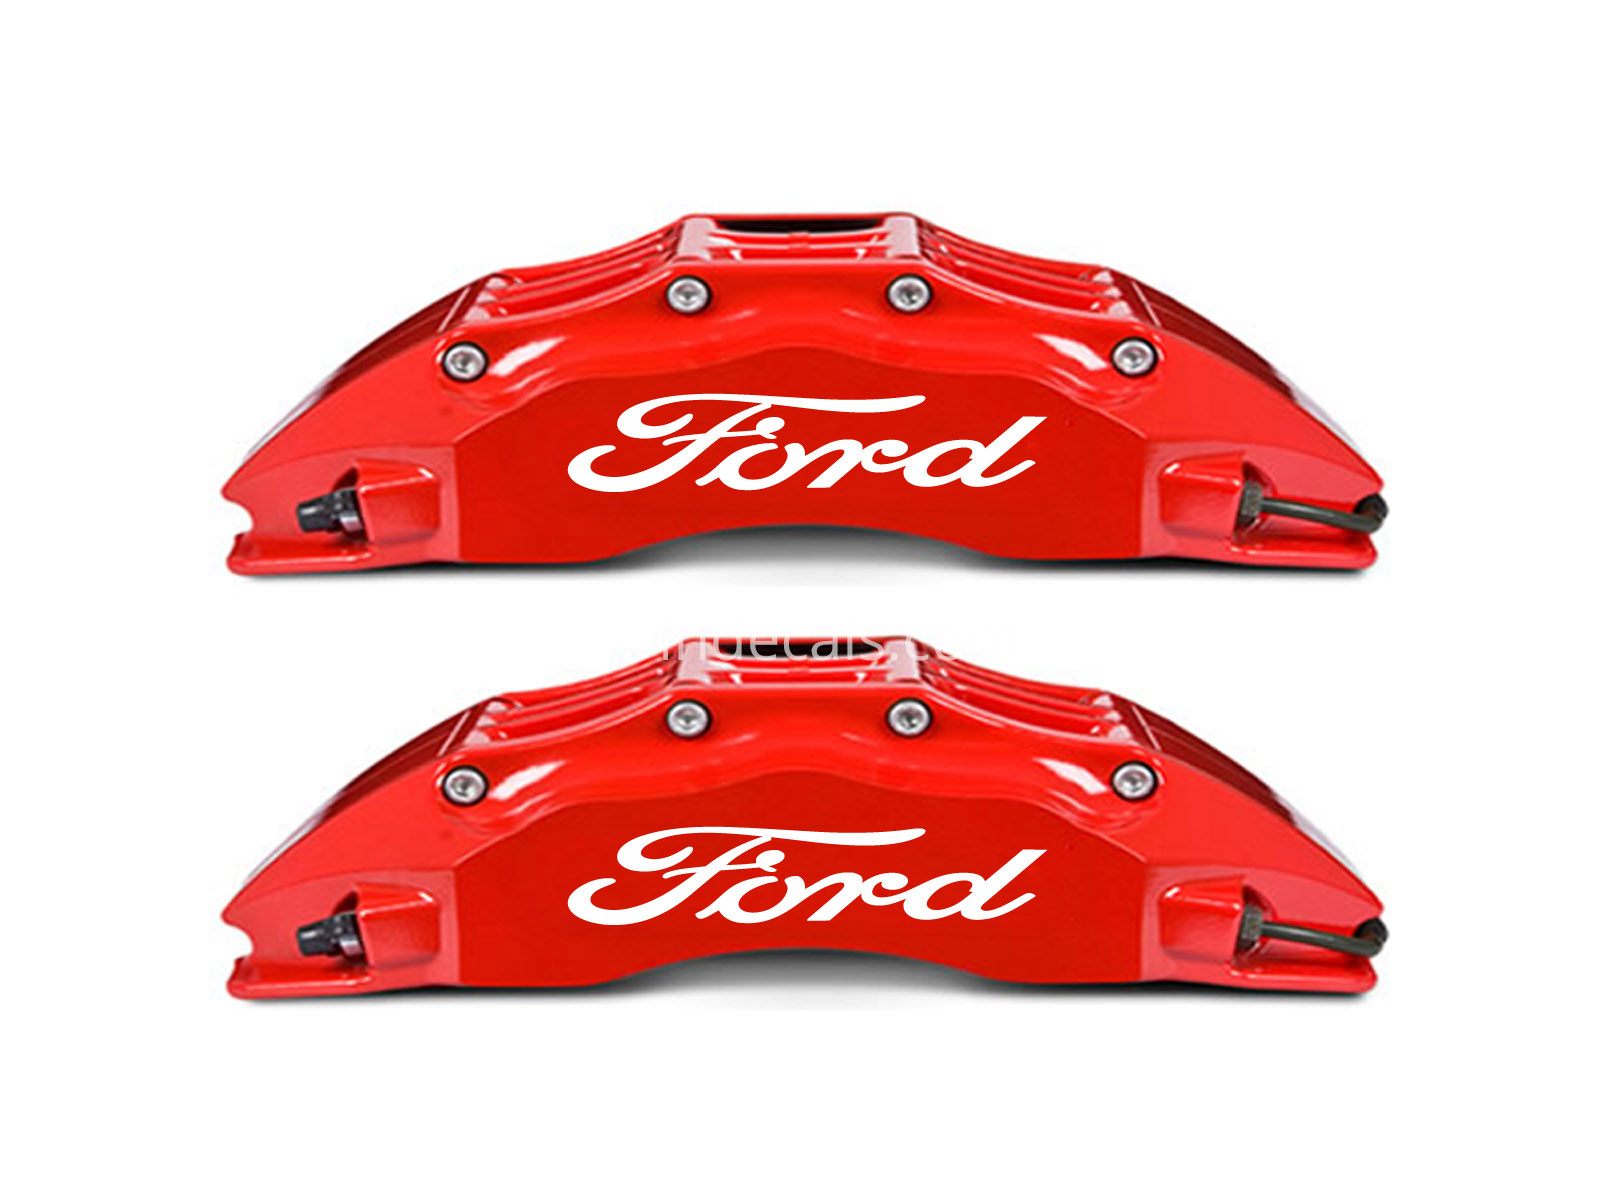 6 x Ford Stickers for Brakes - White